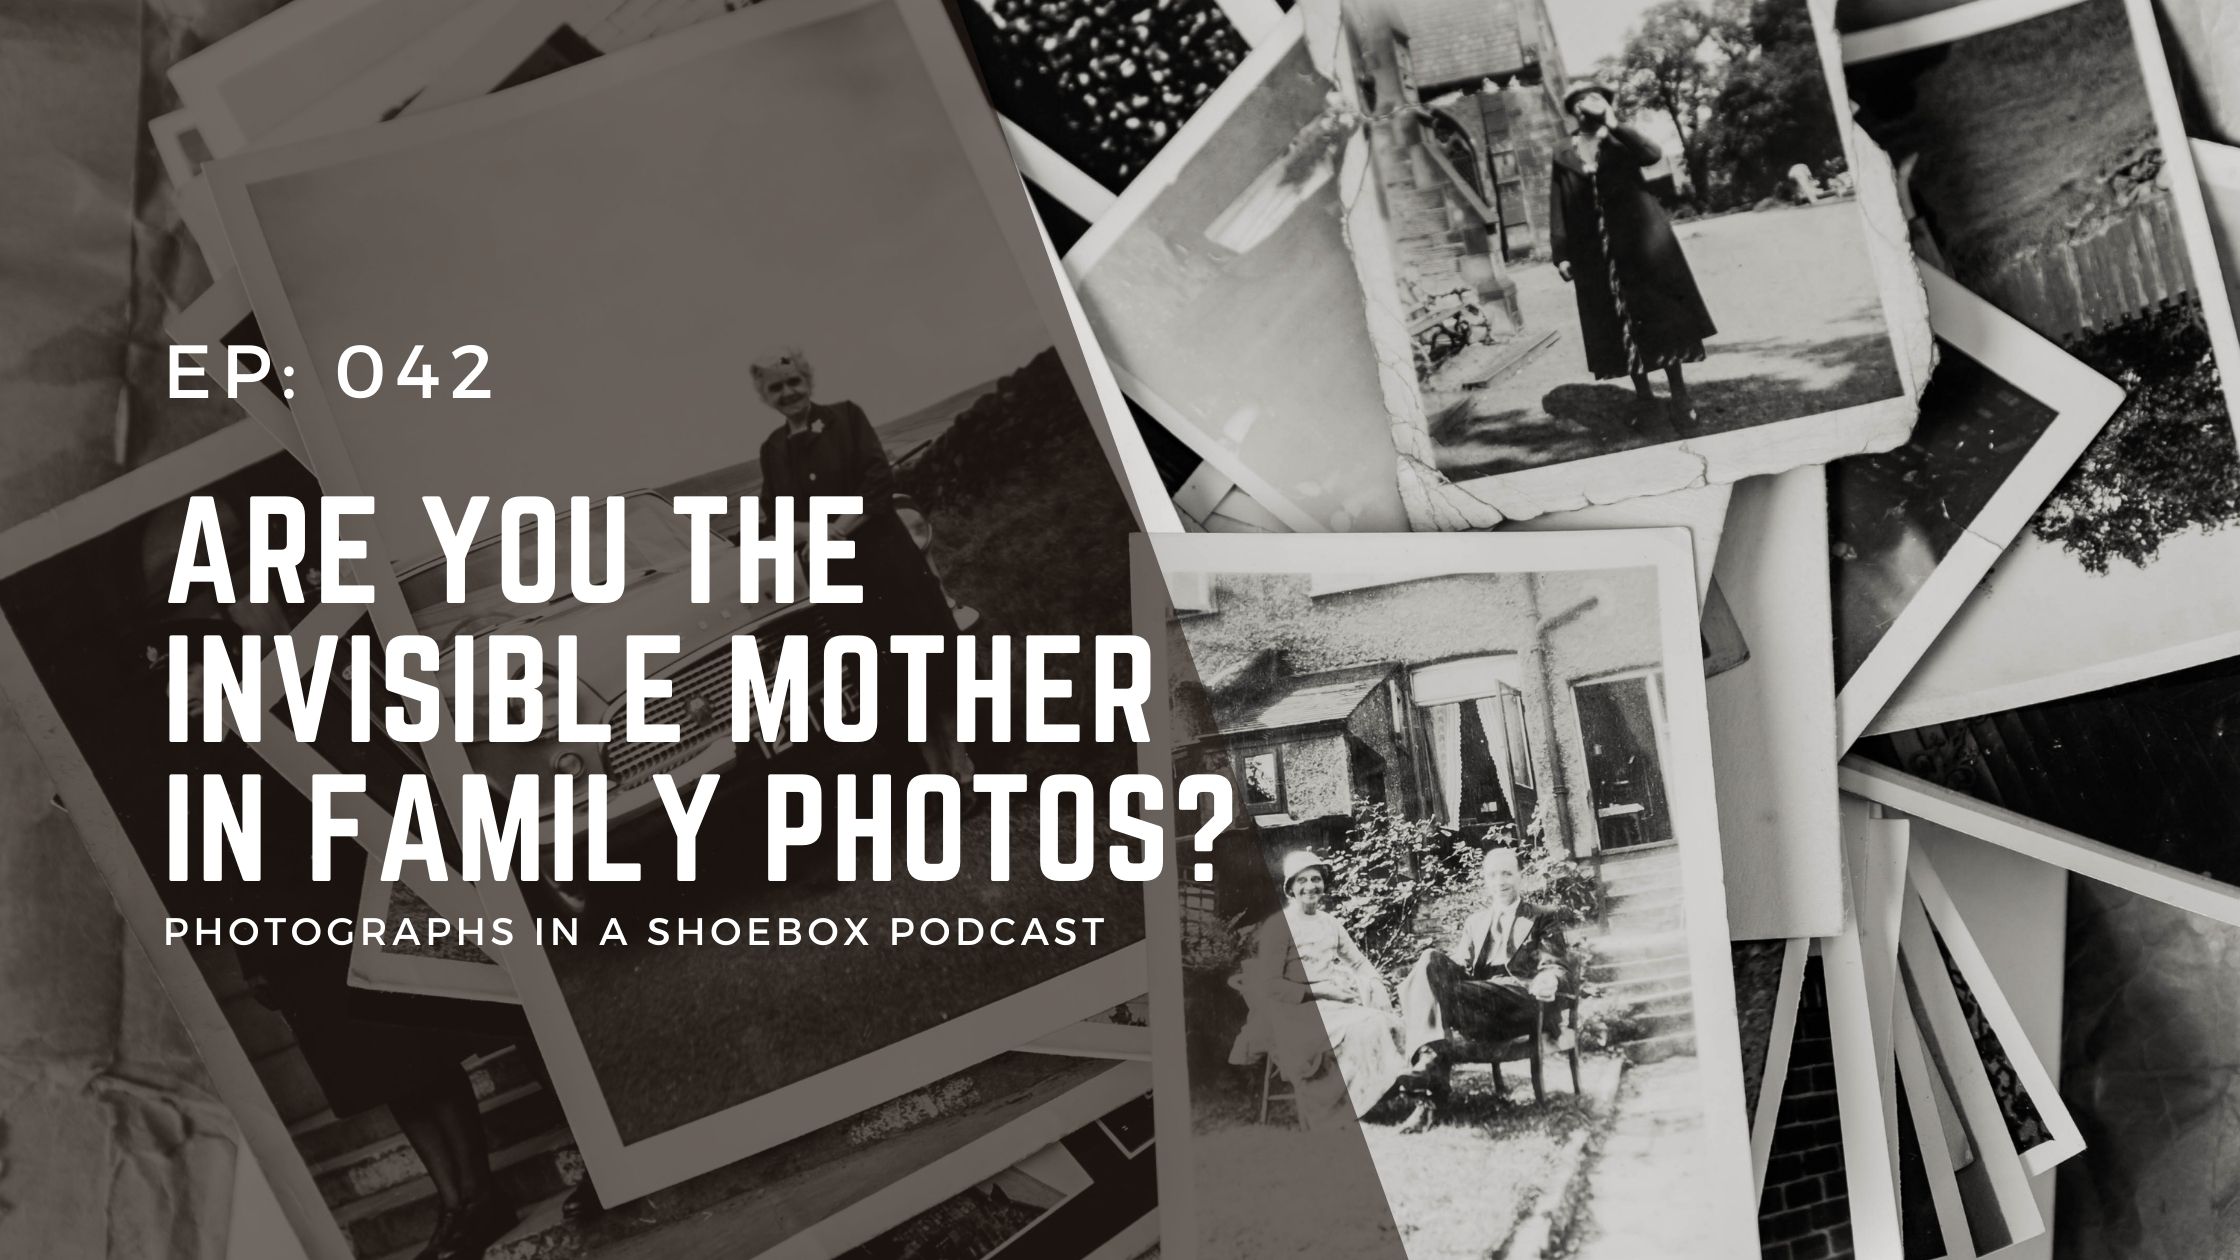 Podcast title artwork for episode 42 are you the invisible mother in family photos